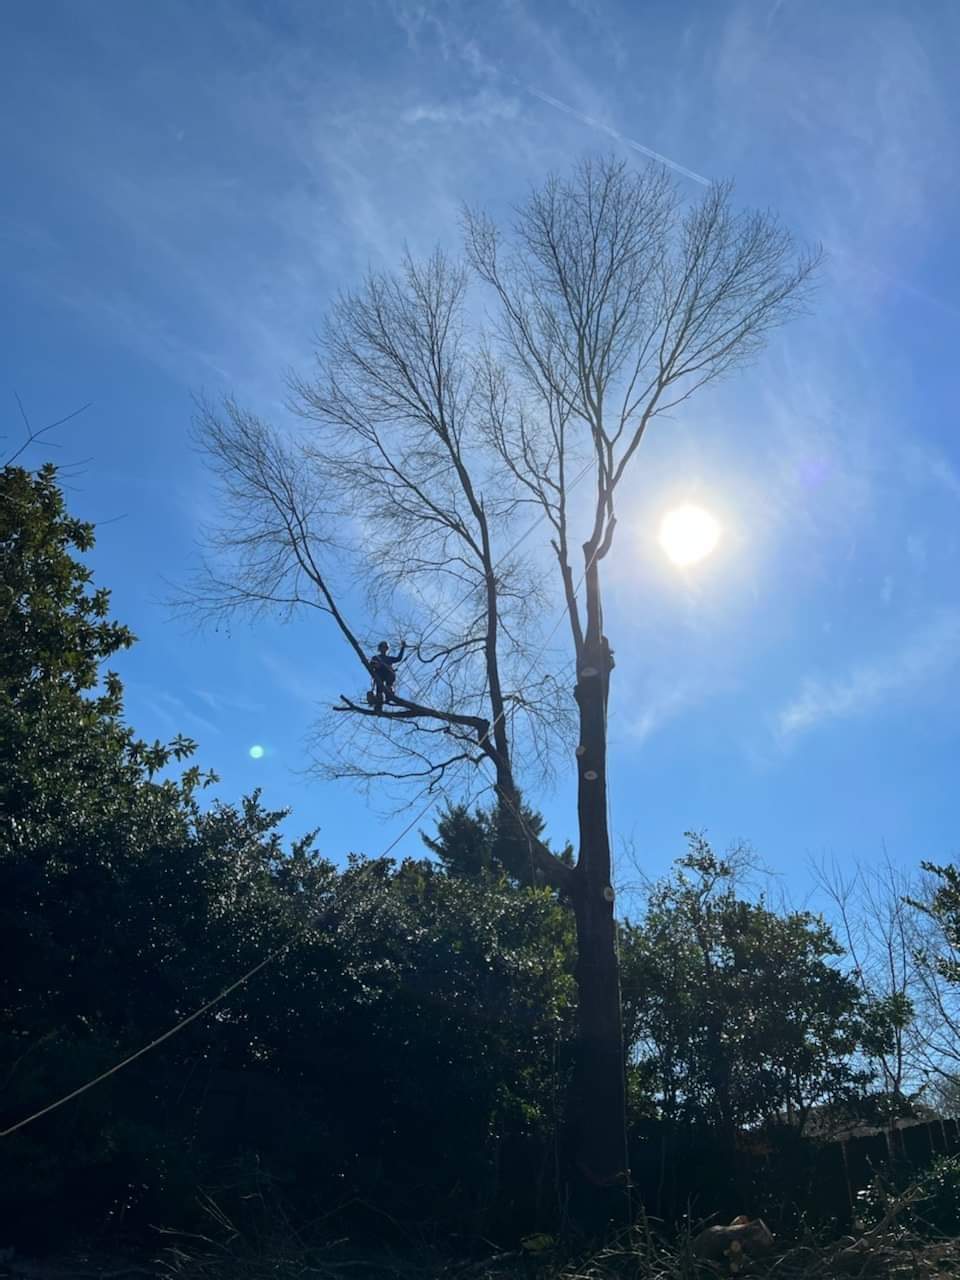 Arborist trimming branches of a tree